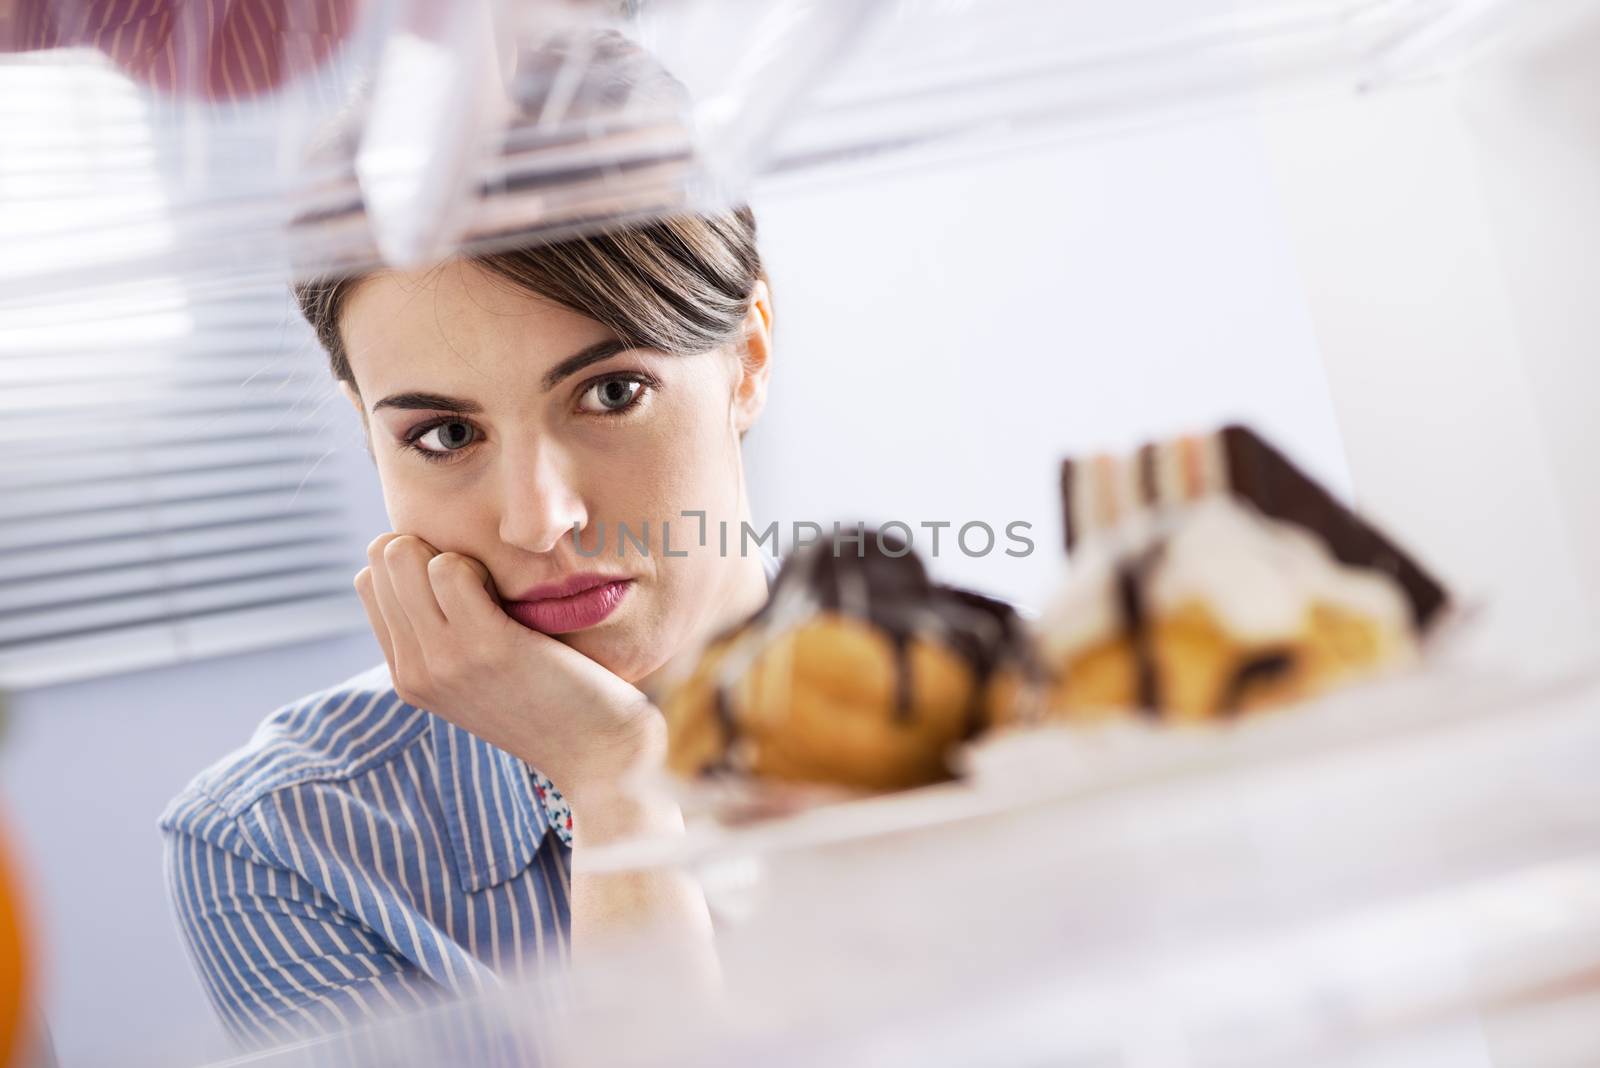 Young hungry woman in front of refrigerator craving chocolate pastries.